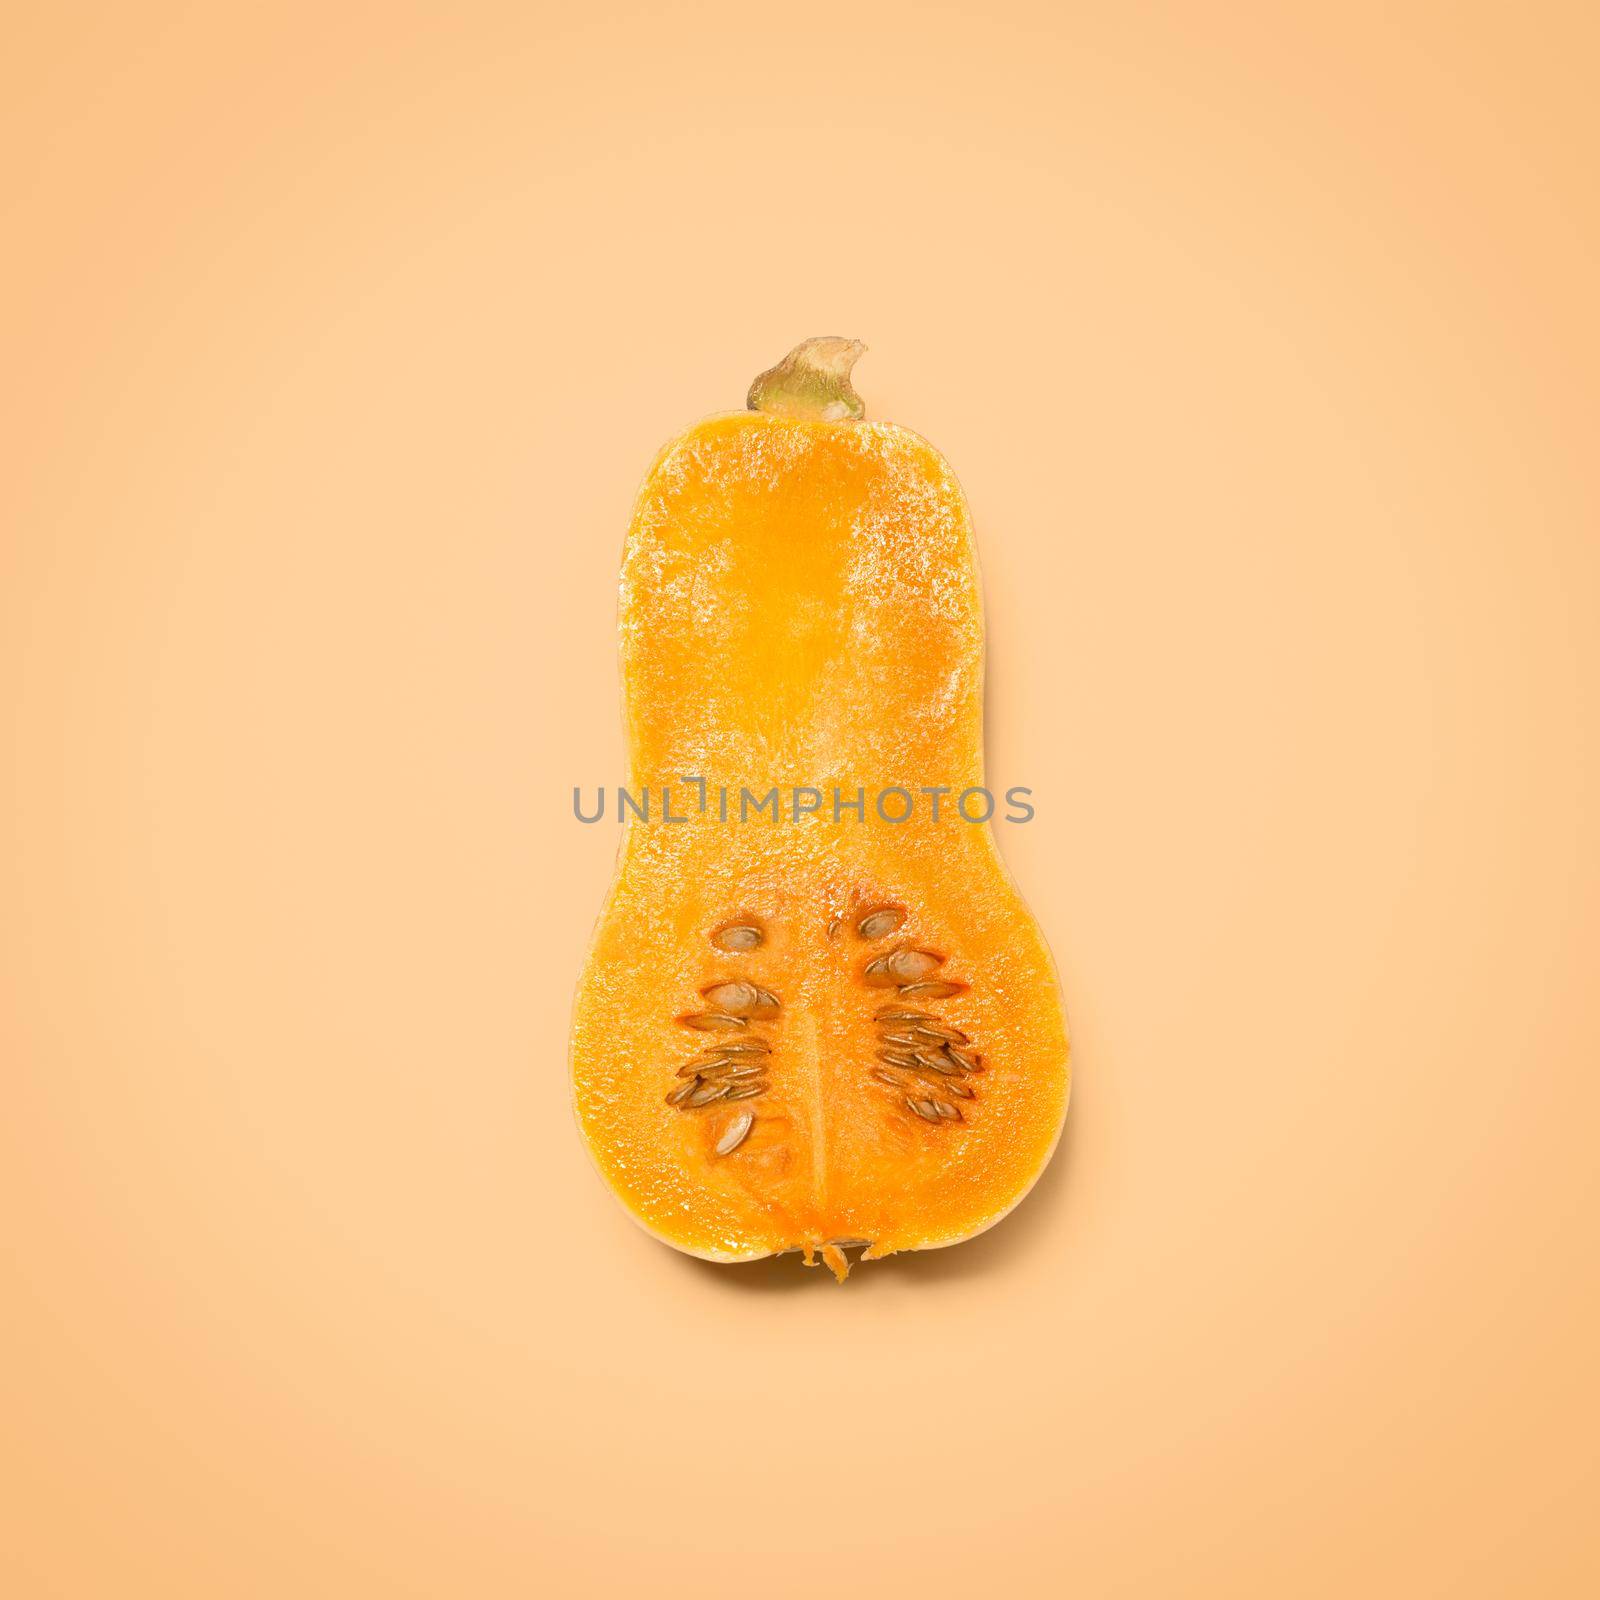 Perfect by itself or in a salad. Shot of a butternut squash against a studio background. by YuriArcurs